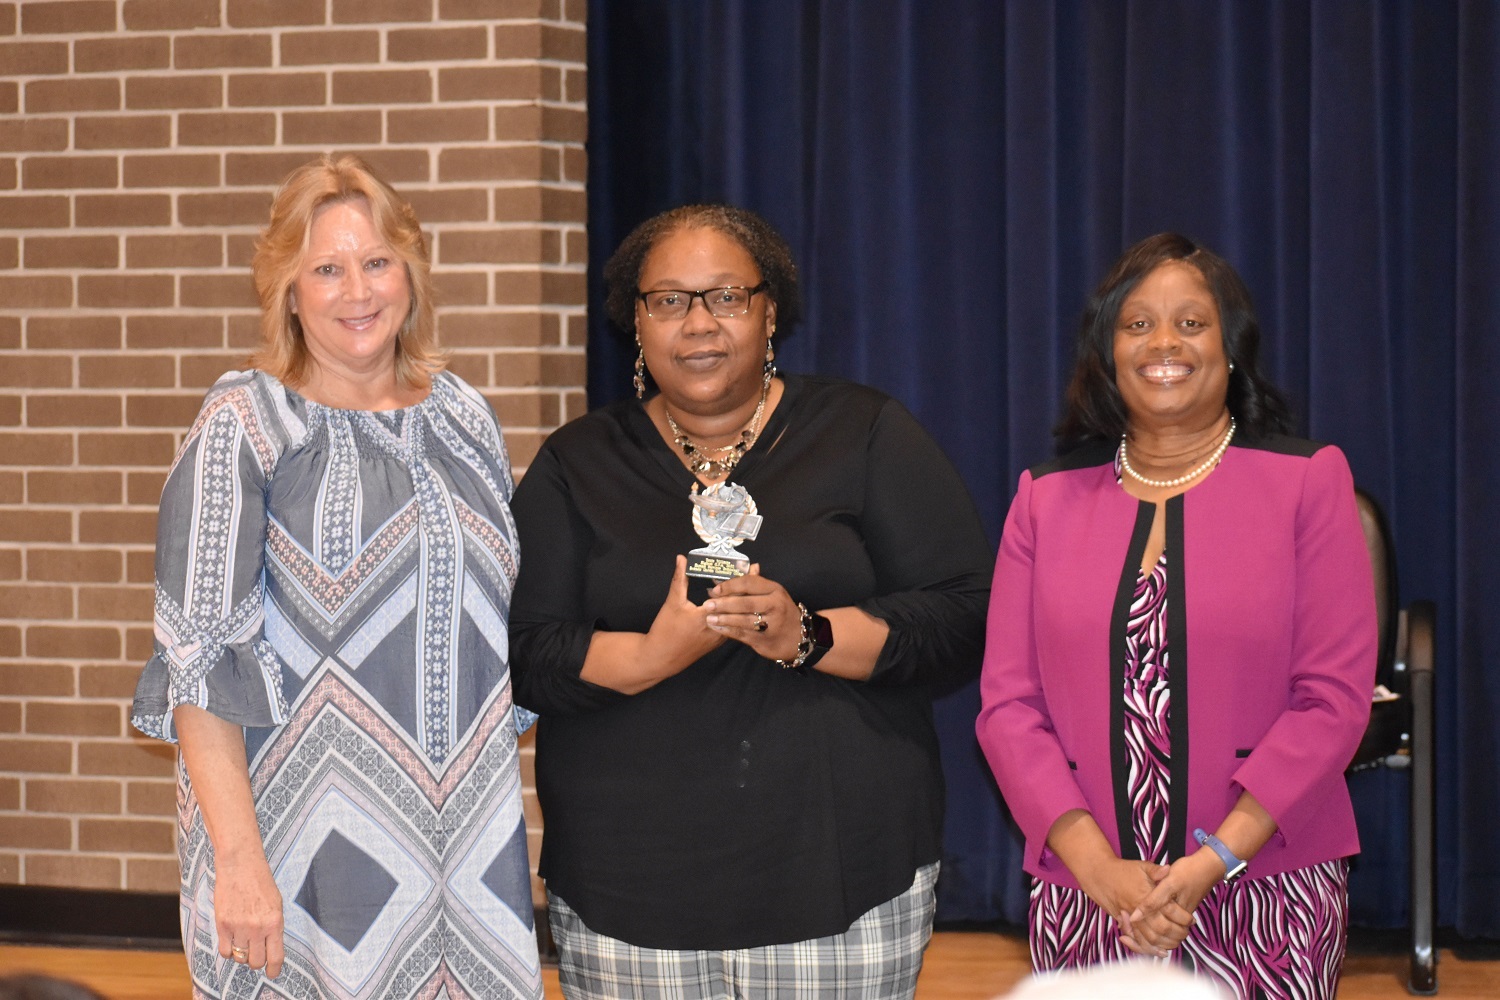 Kimberly Harrell, Associate Dean of Instruction (left), presents academic excellence award to Terrie Williams, along with President Williams.